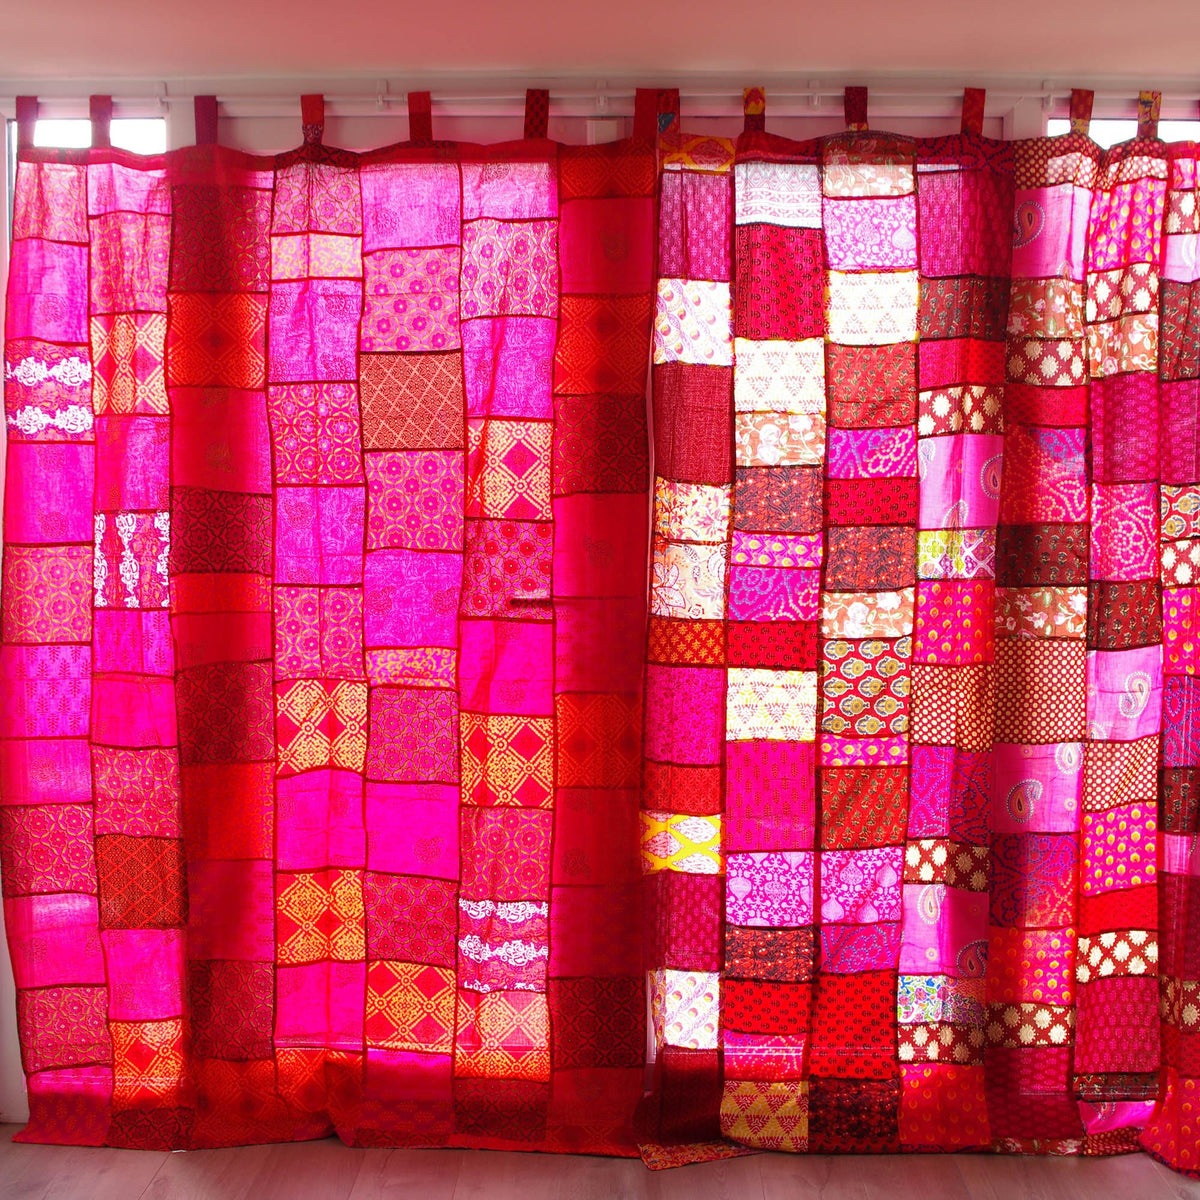 Bohemian Cotton Patchwork Curtains Pair Red/Hot Pink